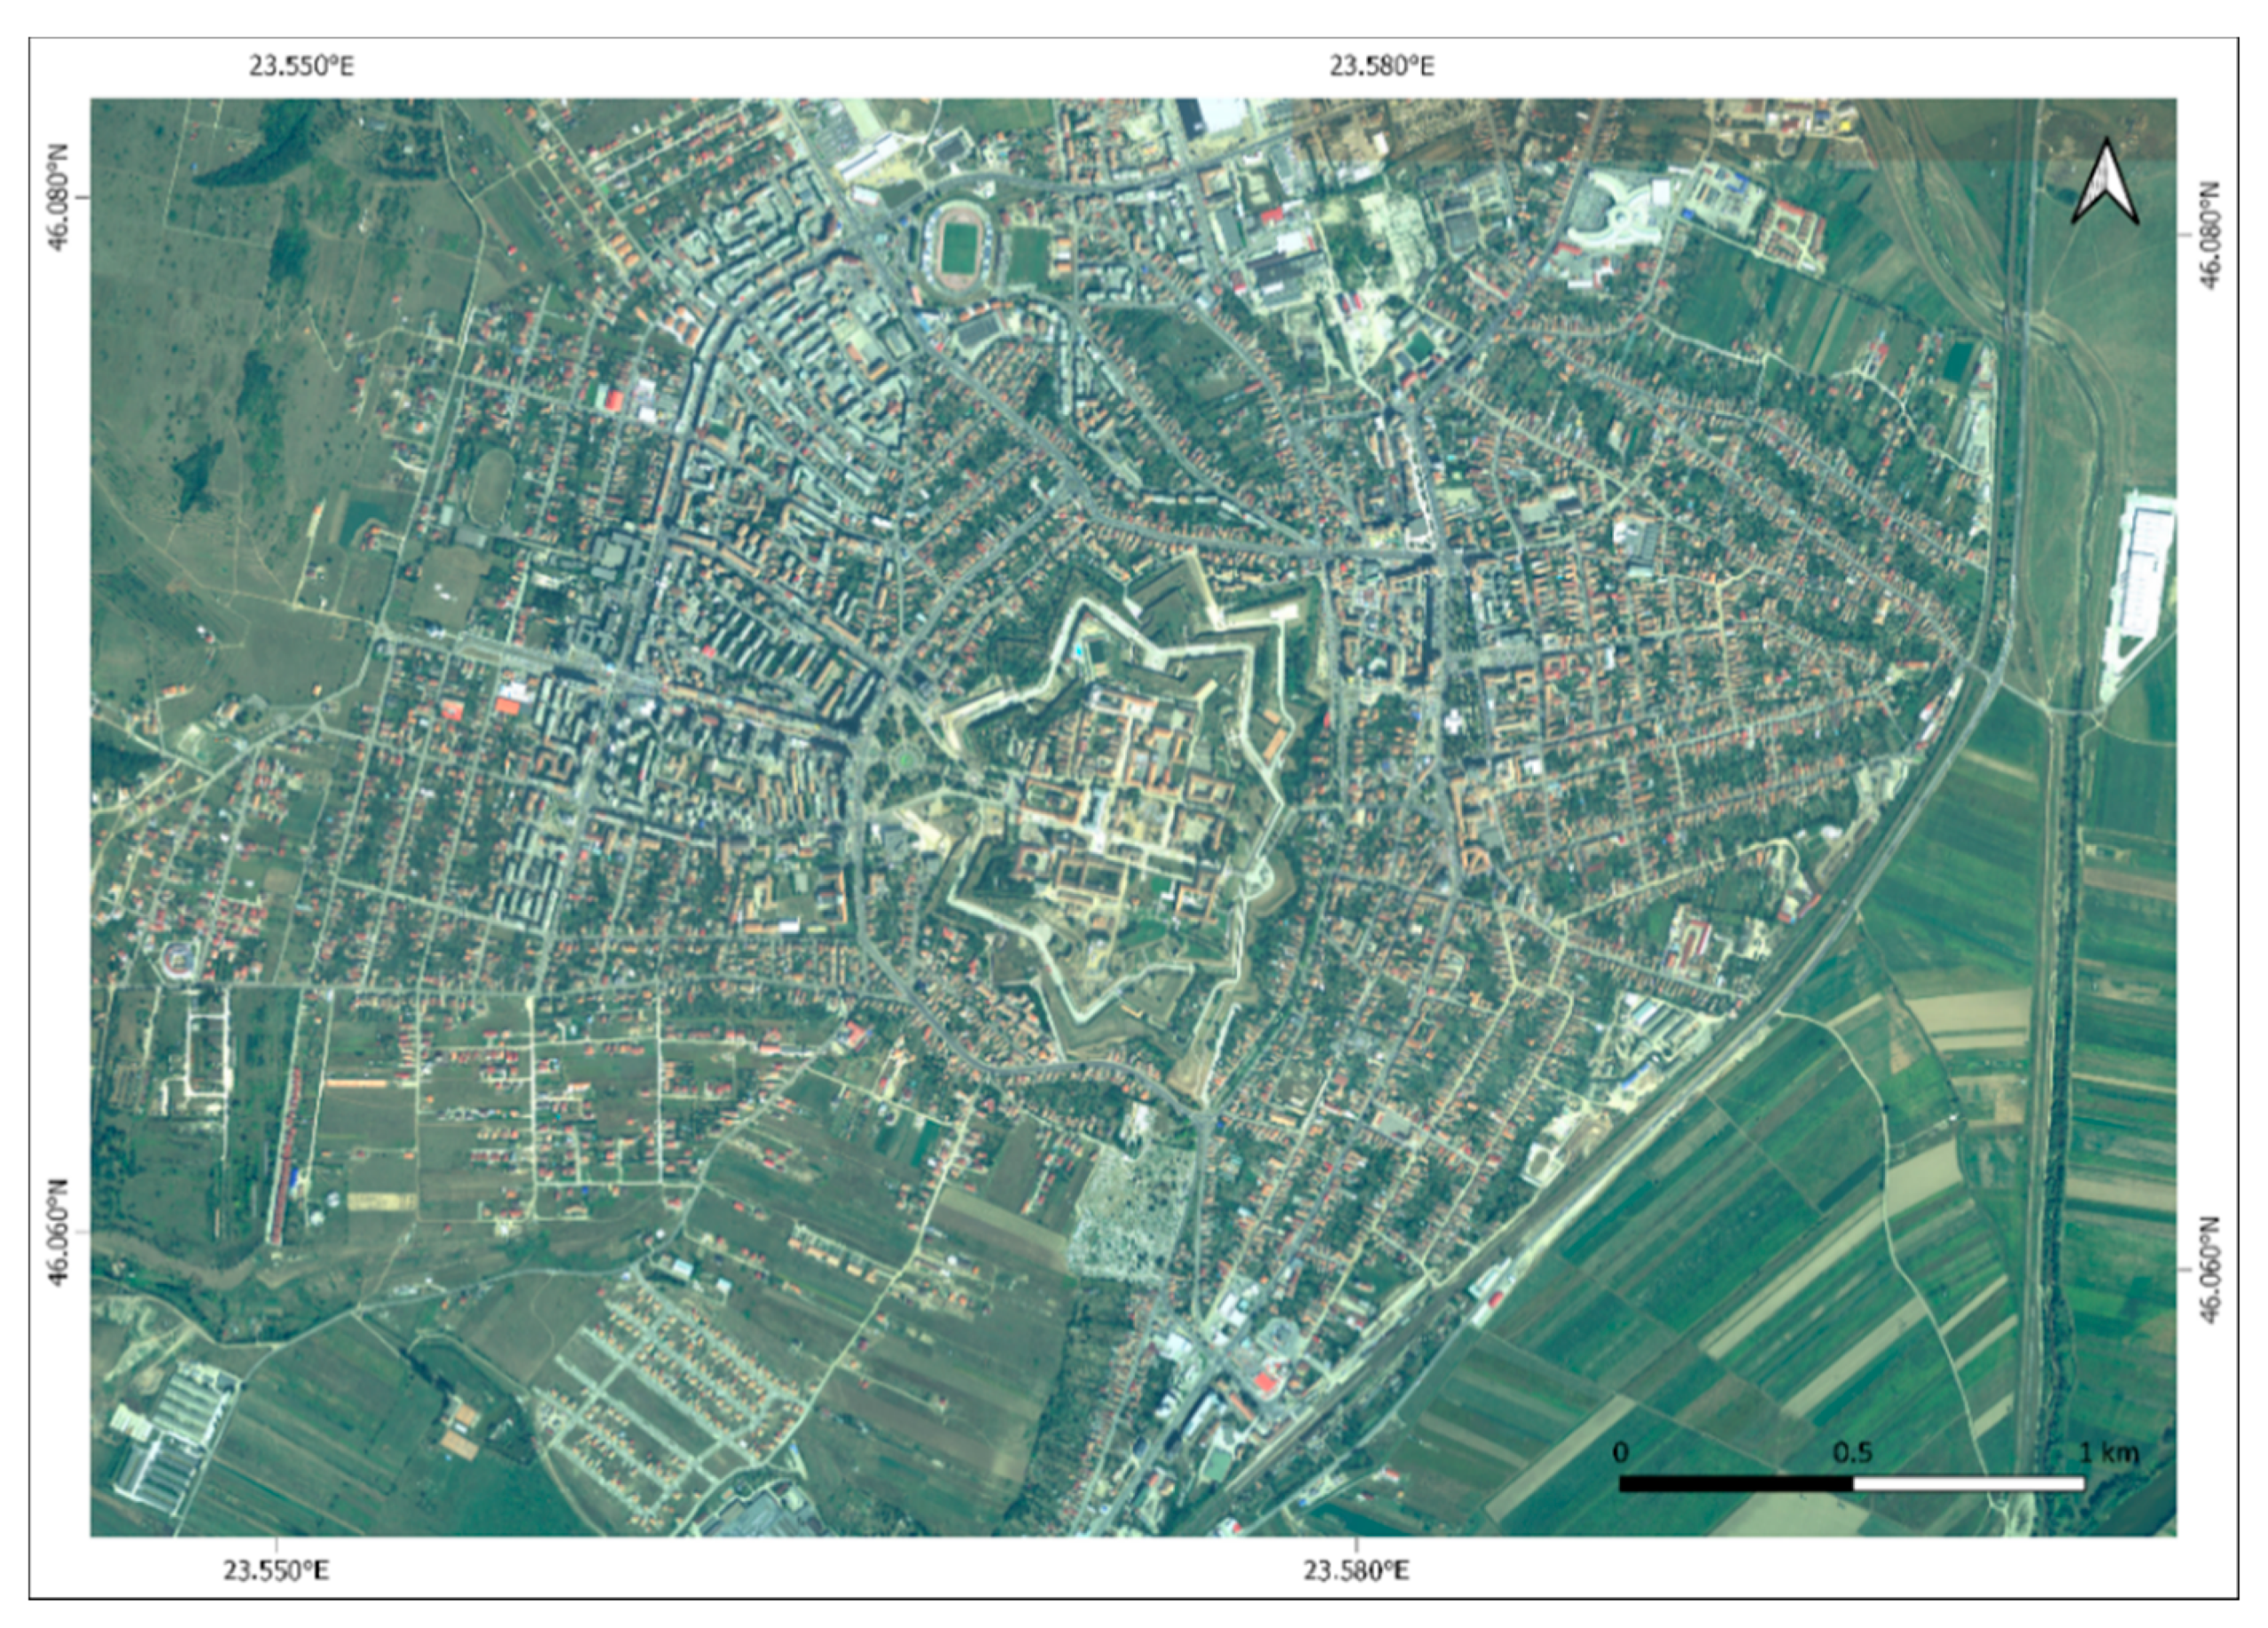 Sustainability | Free Full-Text | Remote Sensing for Cultural Heritage  Assessment and Monitoring: The Case Study of Alba Iulia